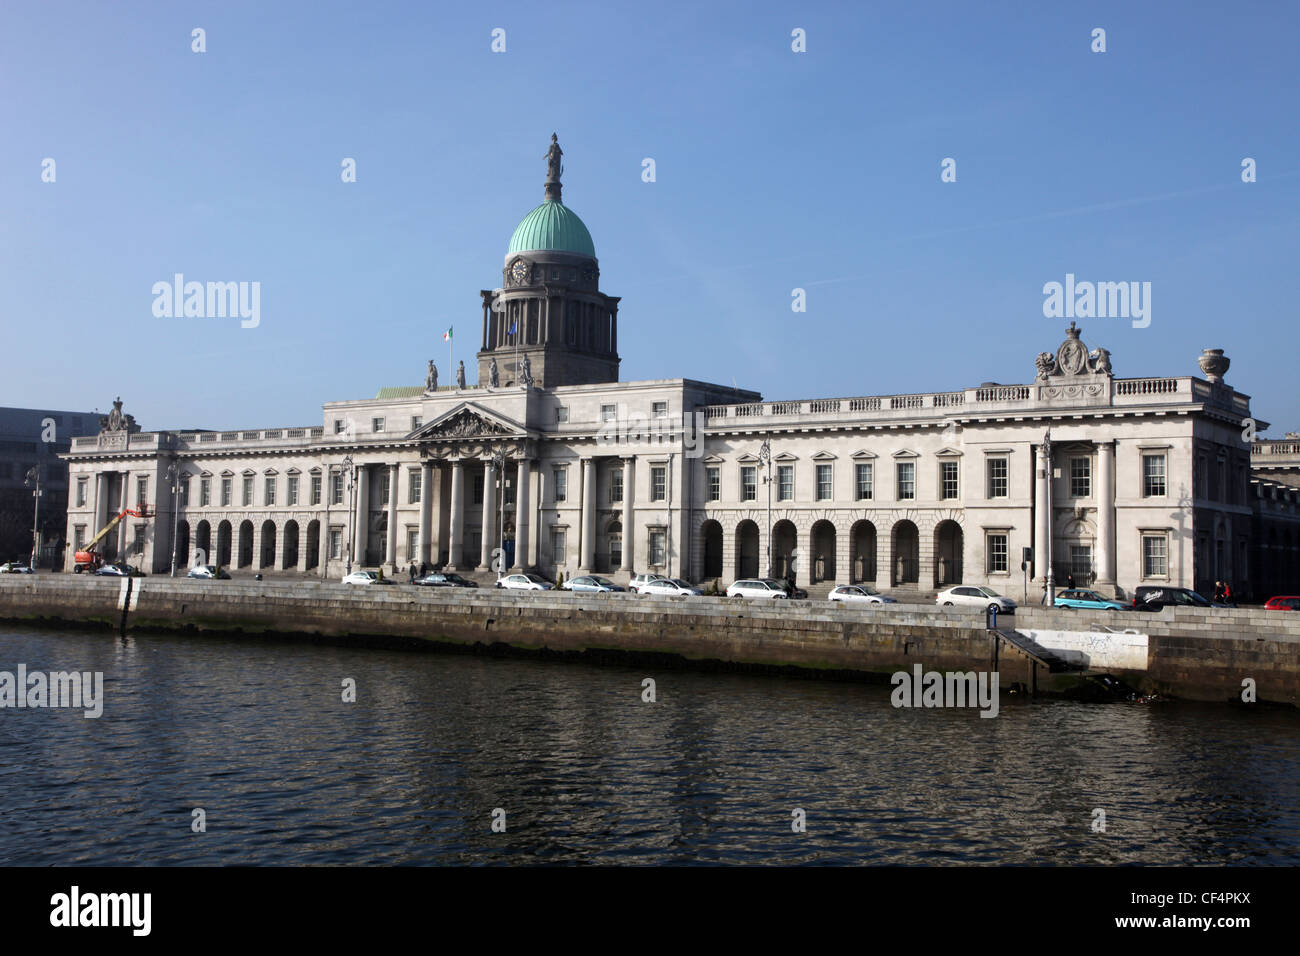 The Custom House, a neoclassical 18th century building by James Gandon on the River Liffey, Dublin. Stock Photo